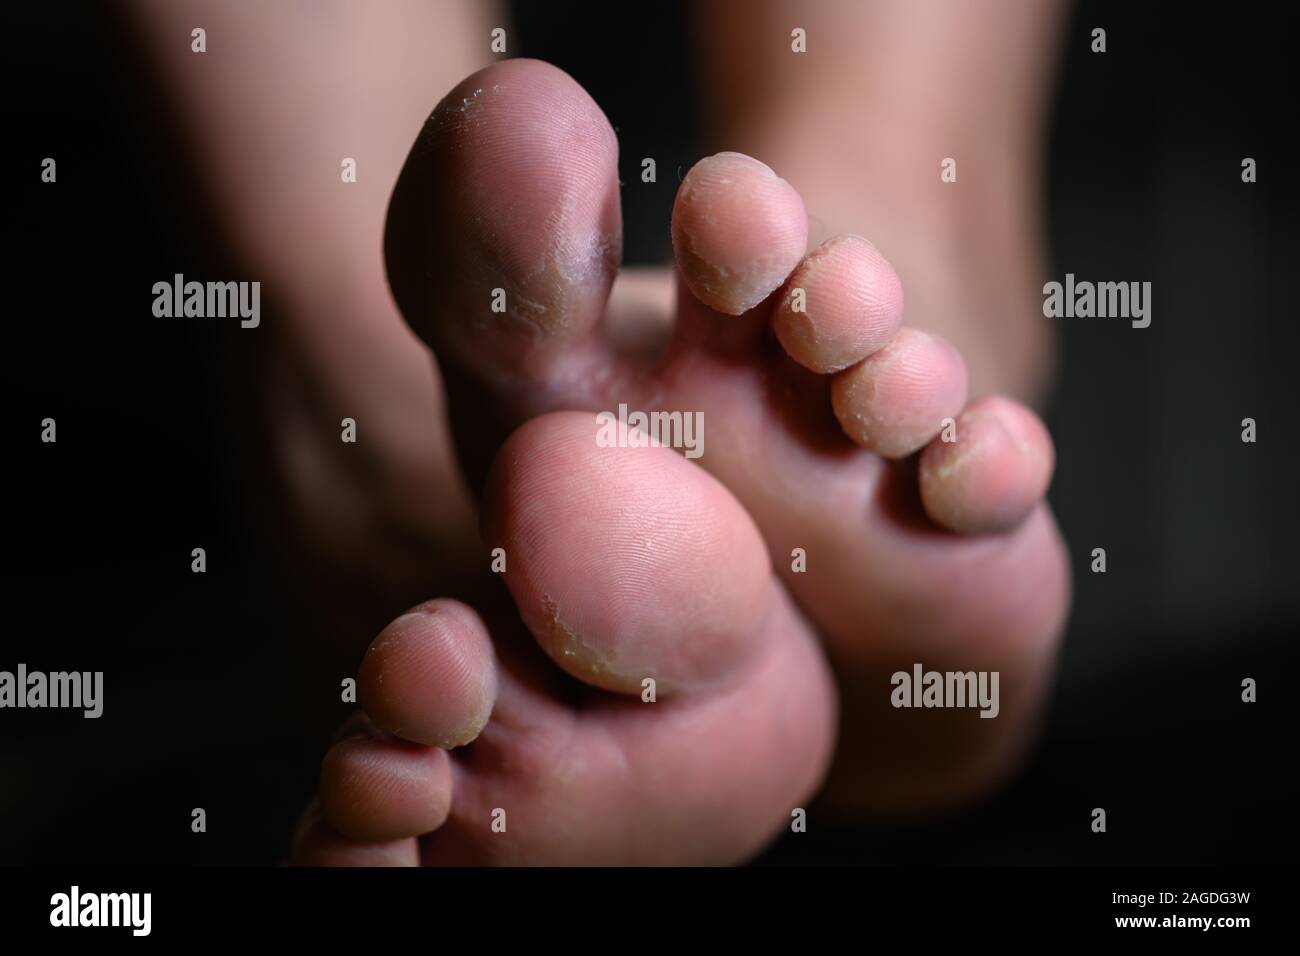 Close up of woman feet having tinea pedis althlete's fungus infection. Pathogenic infectious disease that can be easily acquired from contaminated flo Stock Photo